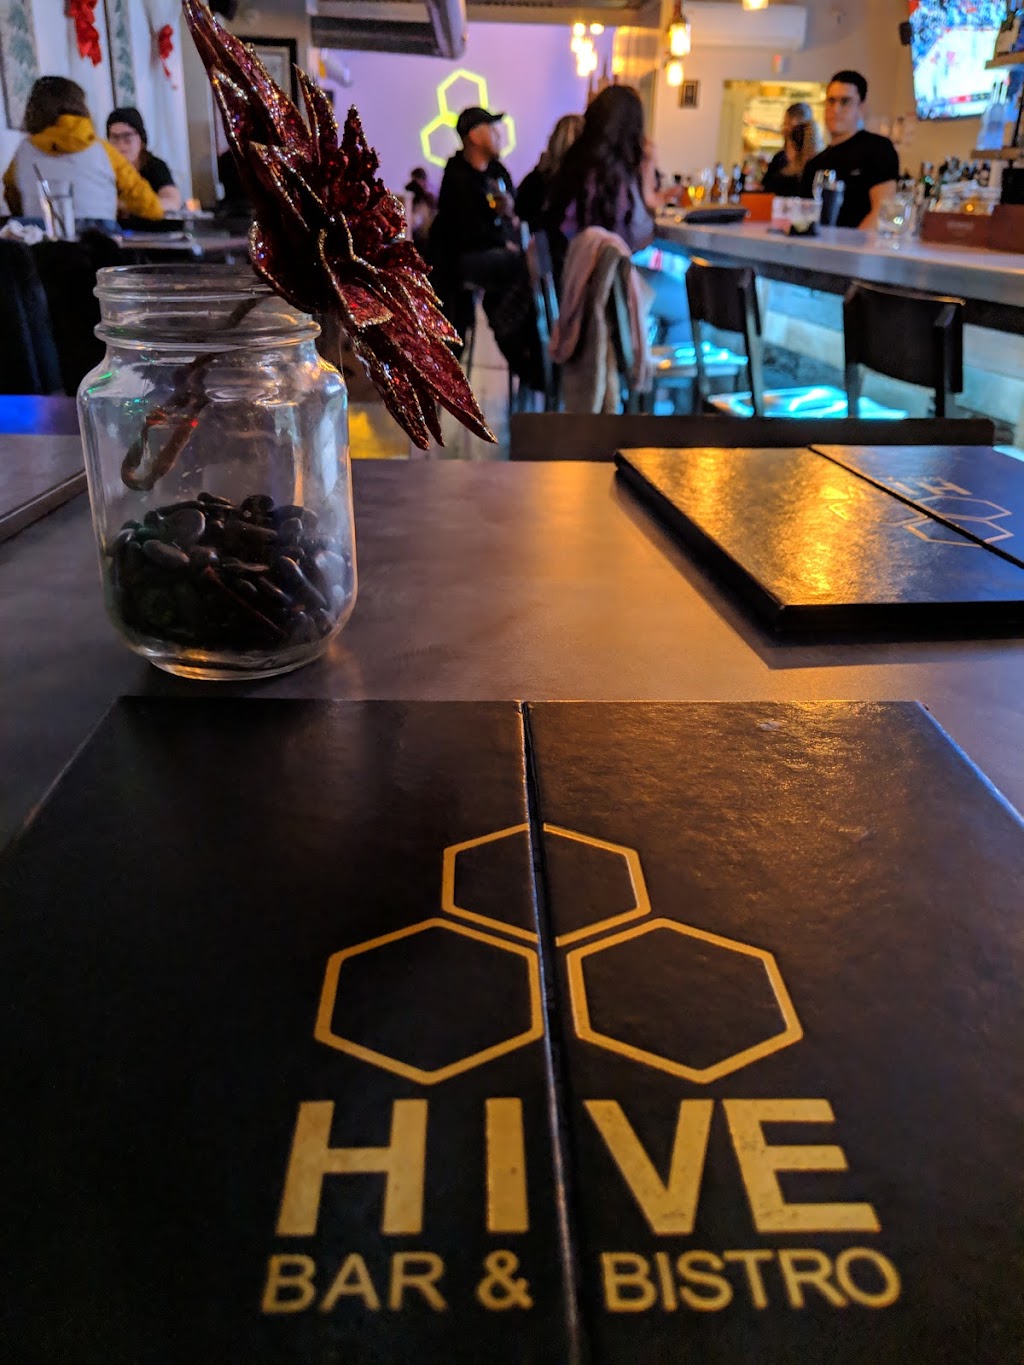 The Hive Bar & Bistro | 142, 2623 Outwater Ln, Garfield, NJ 07026 | Phone: (973) 955-4414